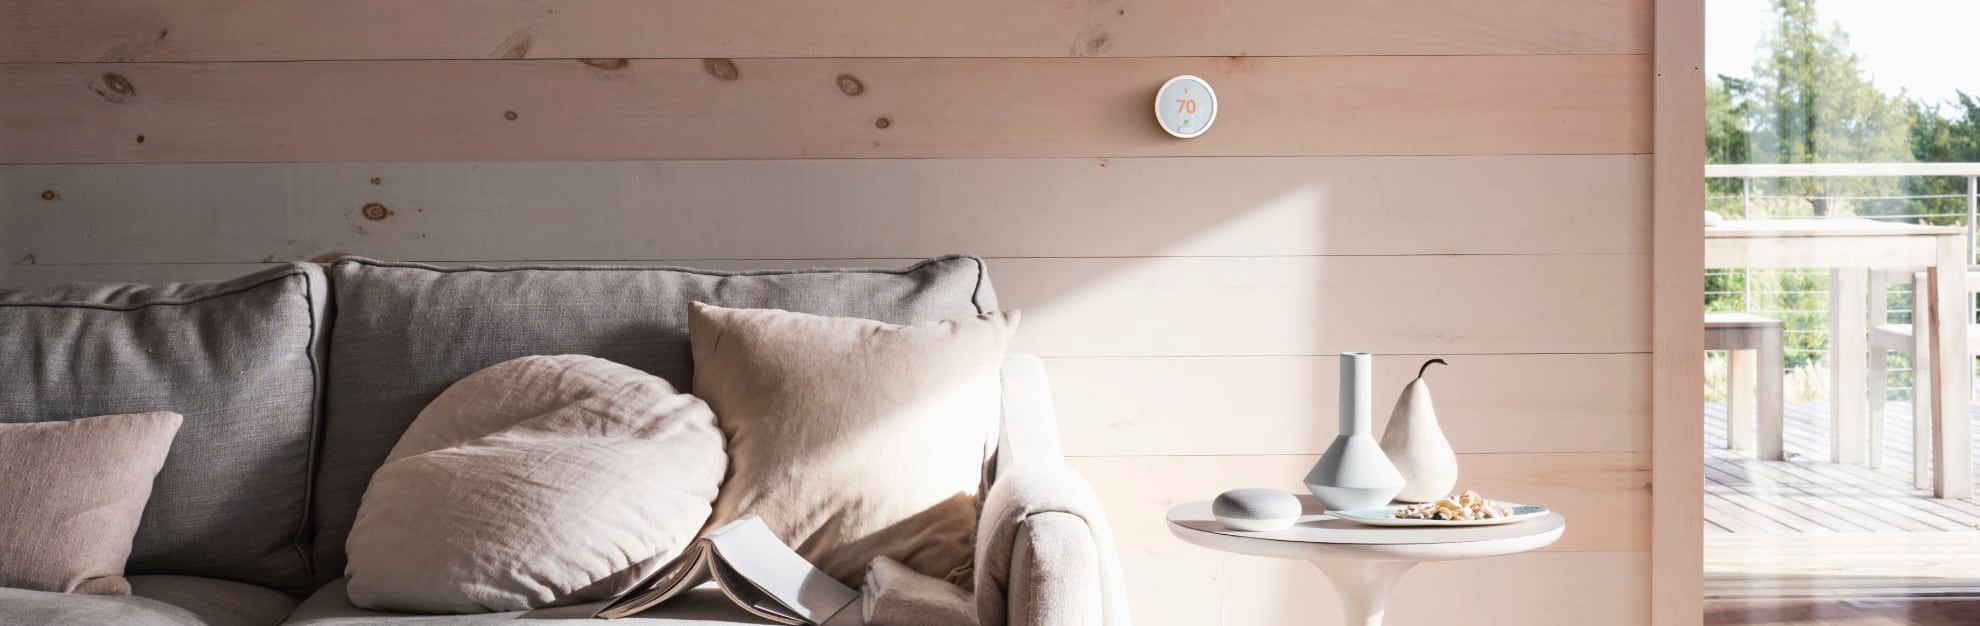 Vivint Home Automation in Huntington